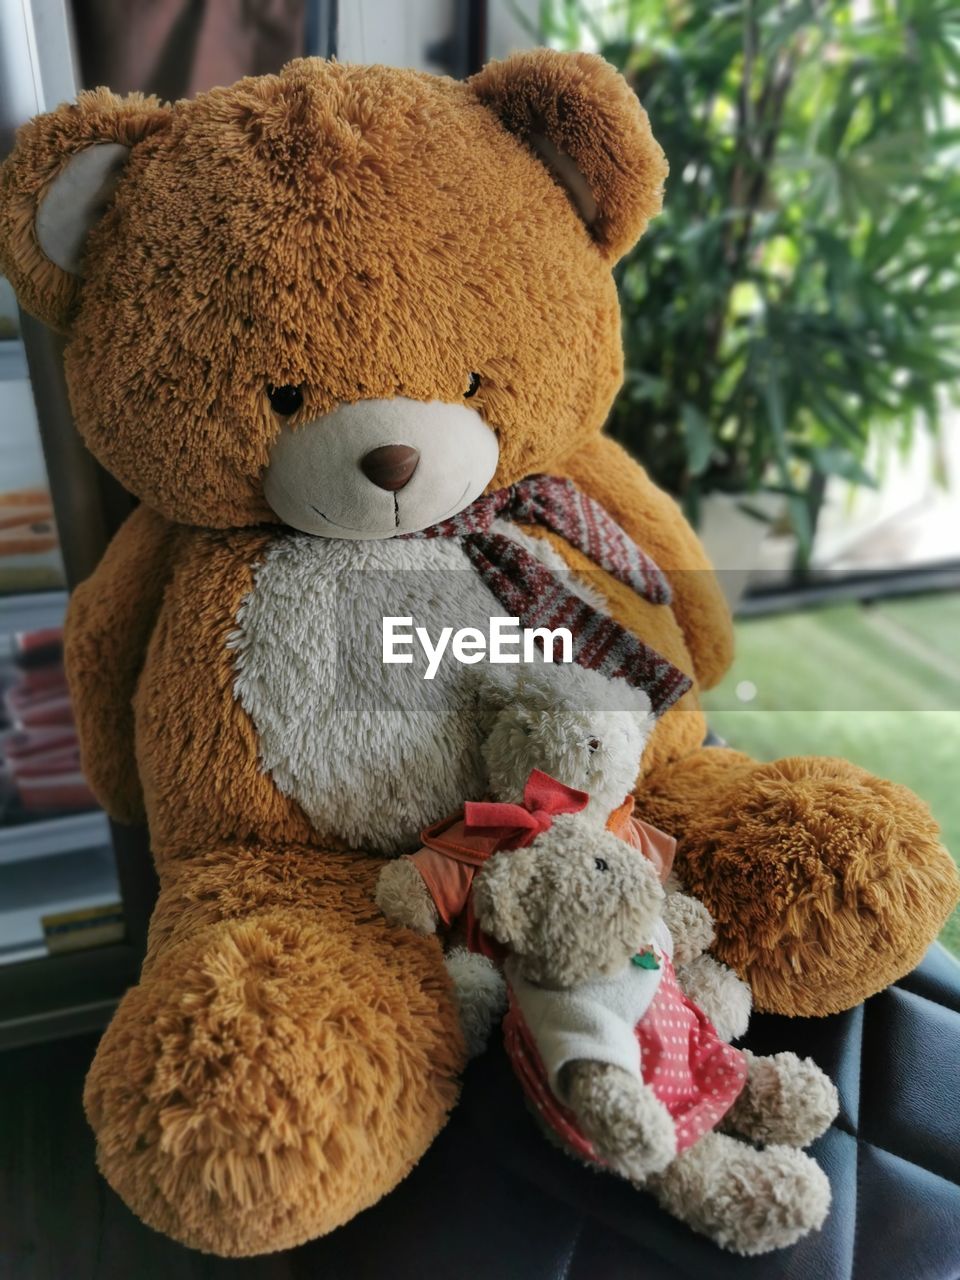 CLOSE-UP OF STUFFED TOY WITH TOYS